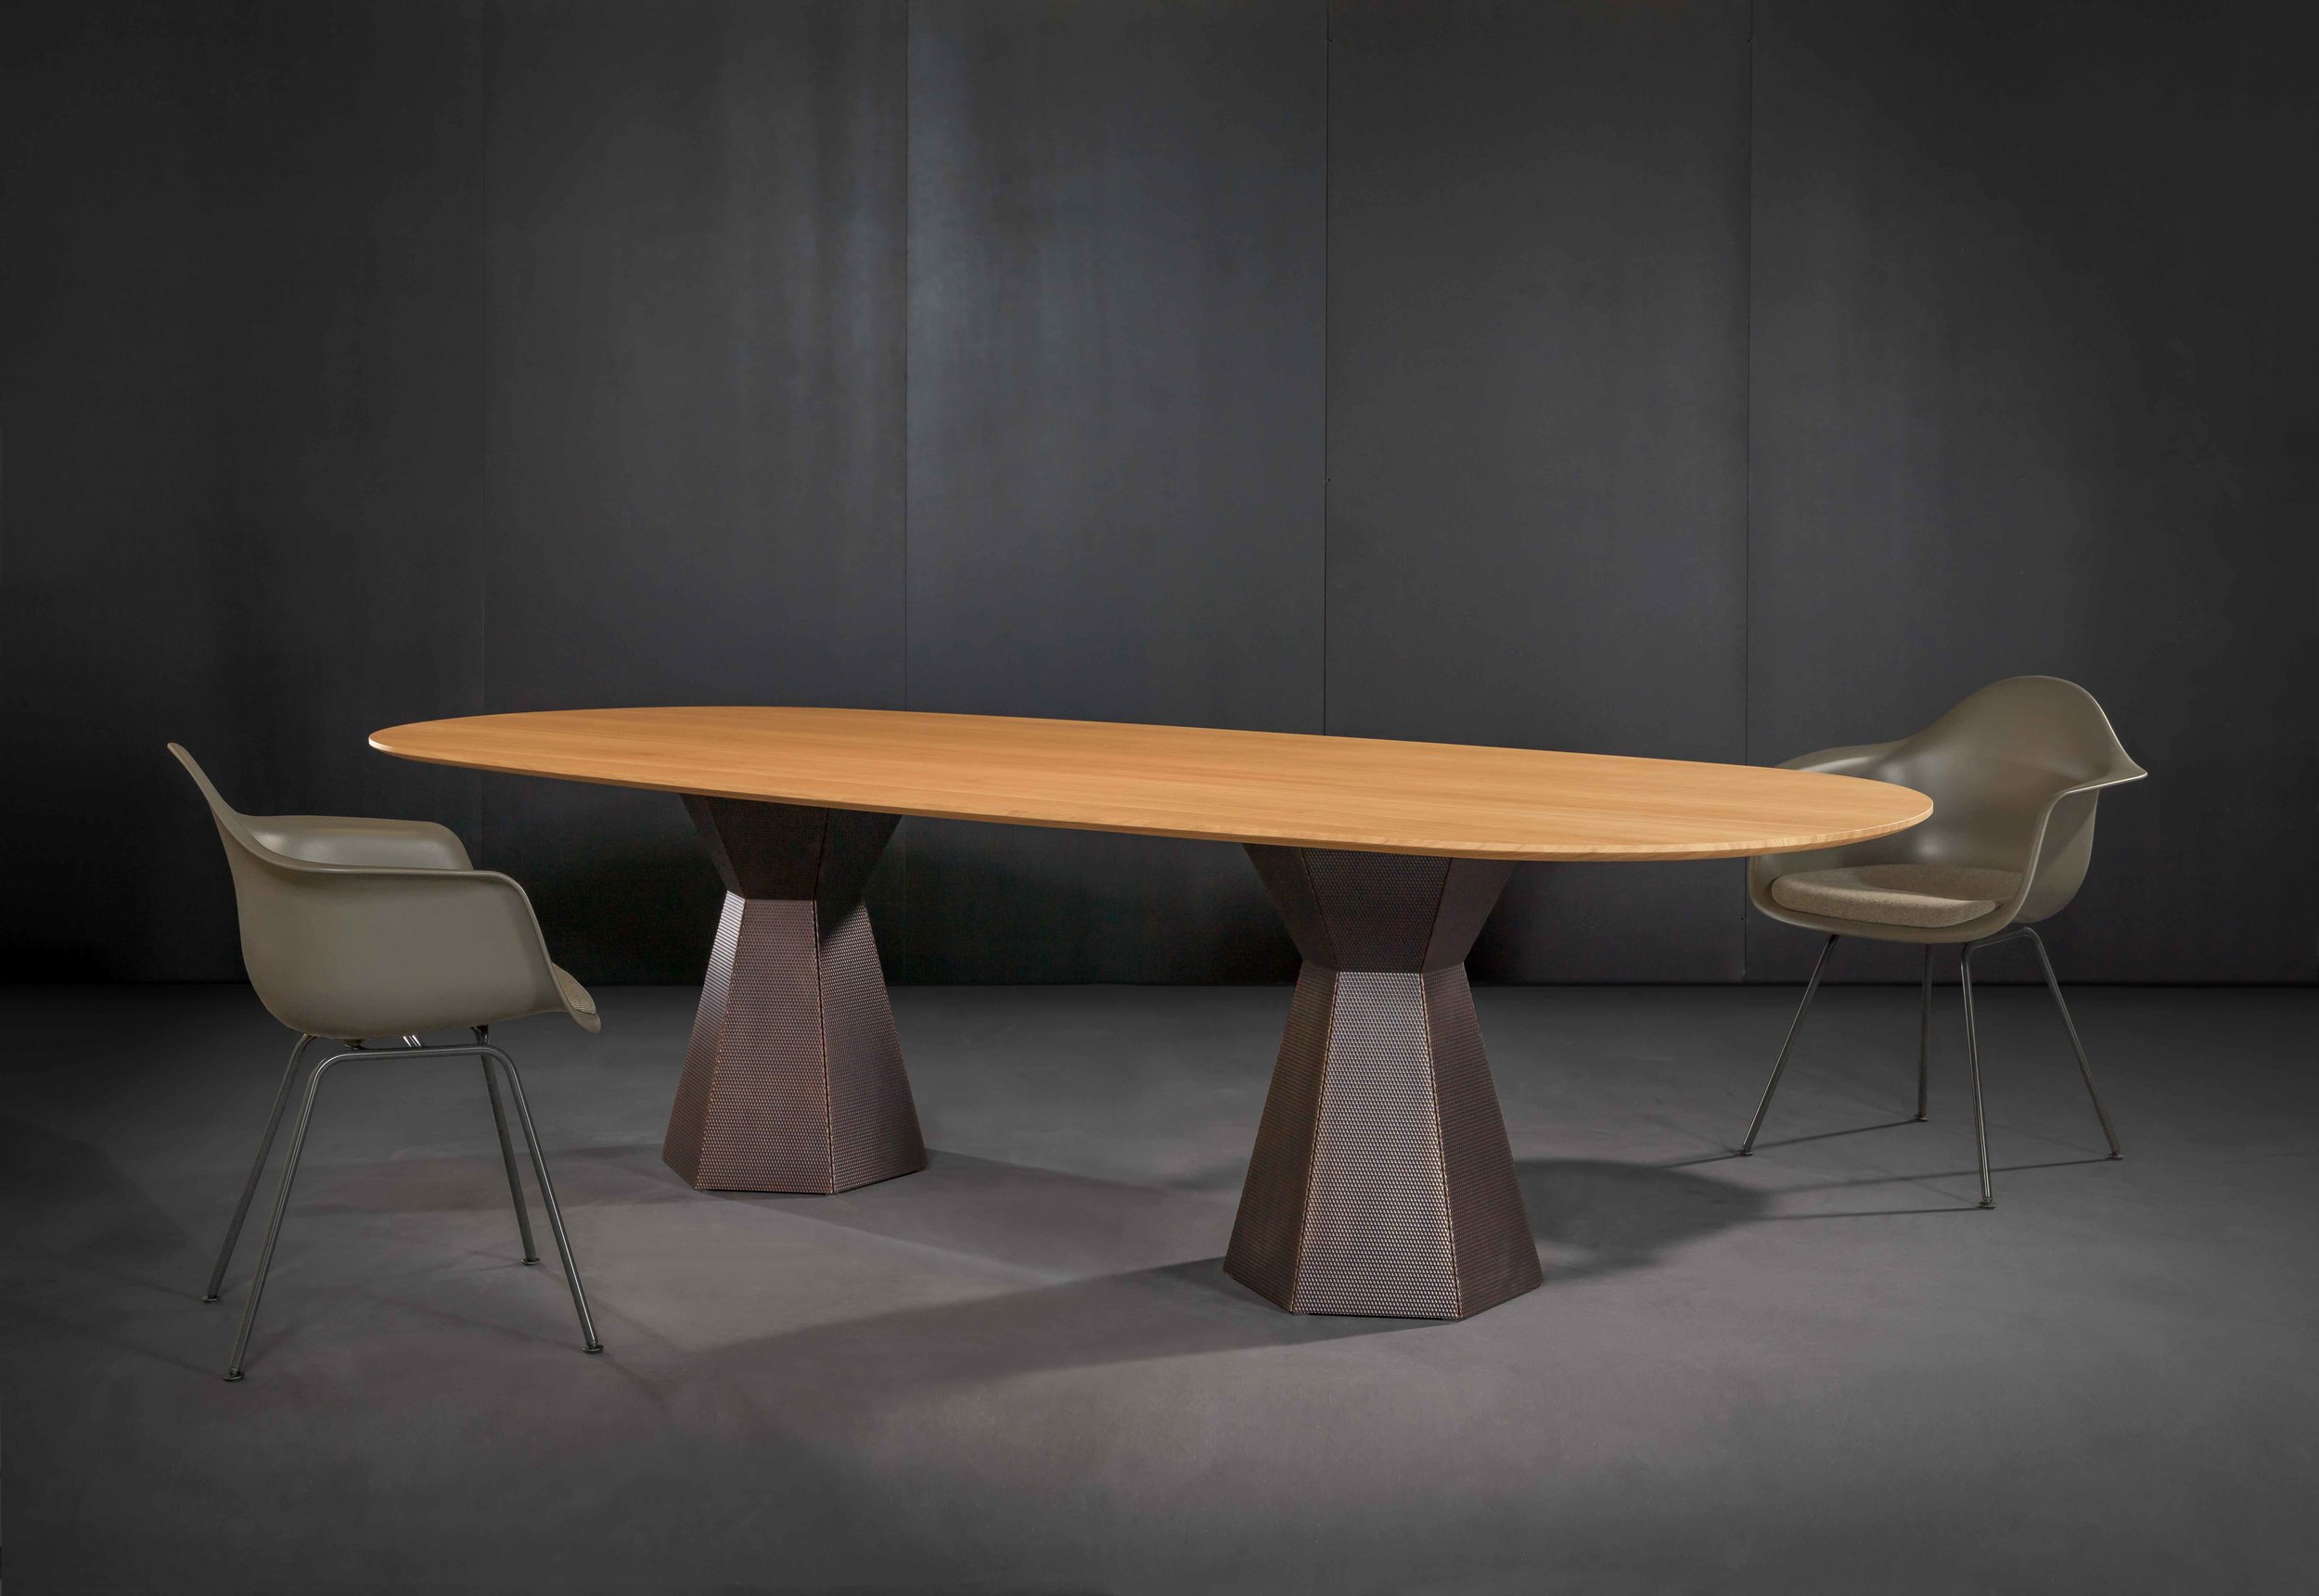 Top Oak, raw wood effect lacquered / Edge K 79 / Base Nordic brown 7000